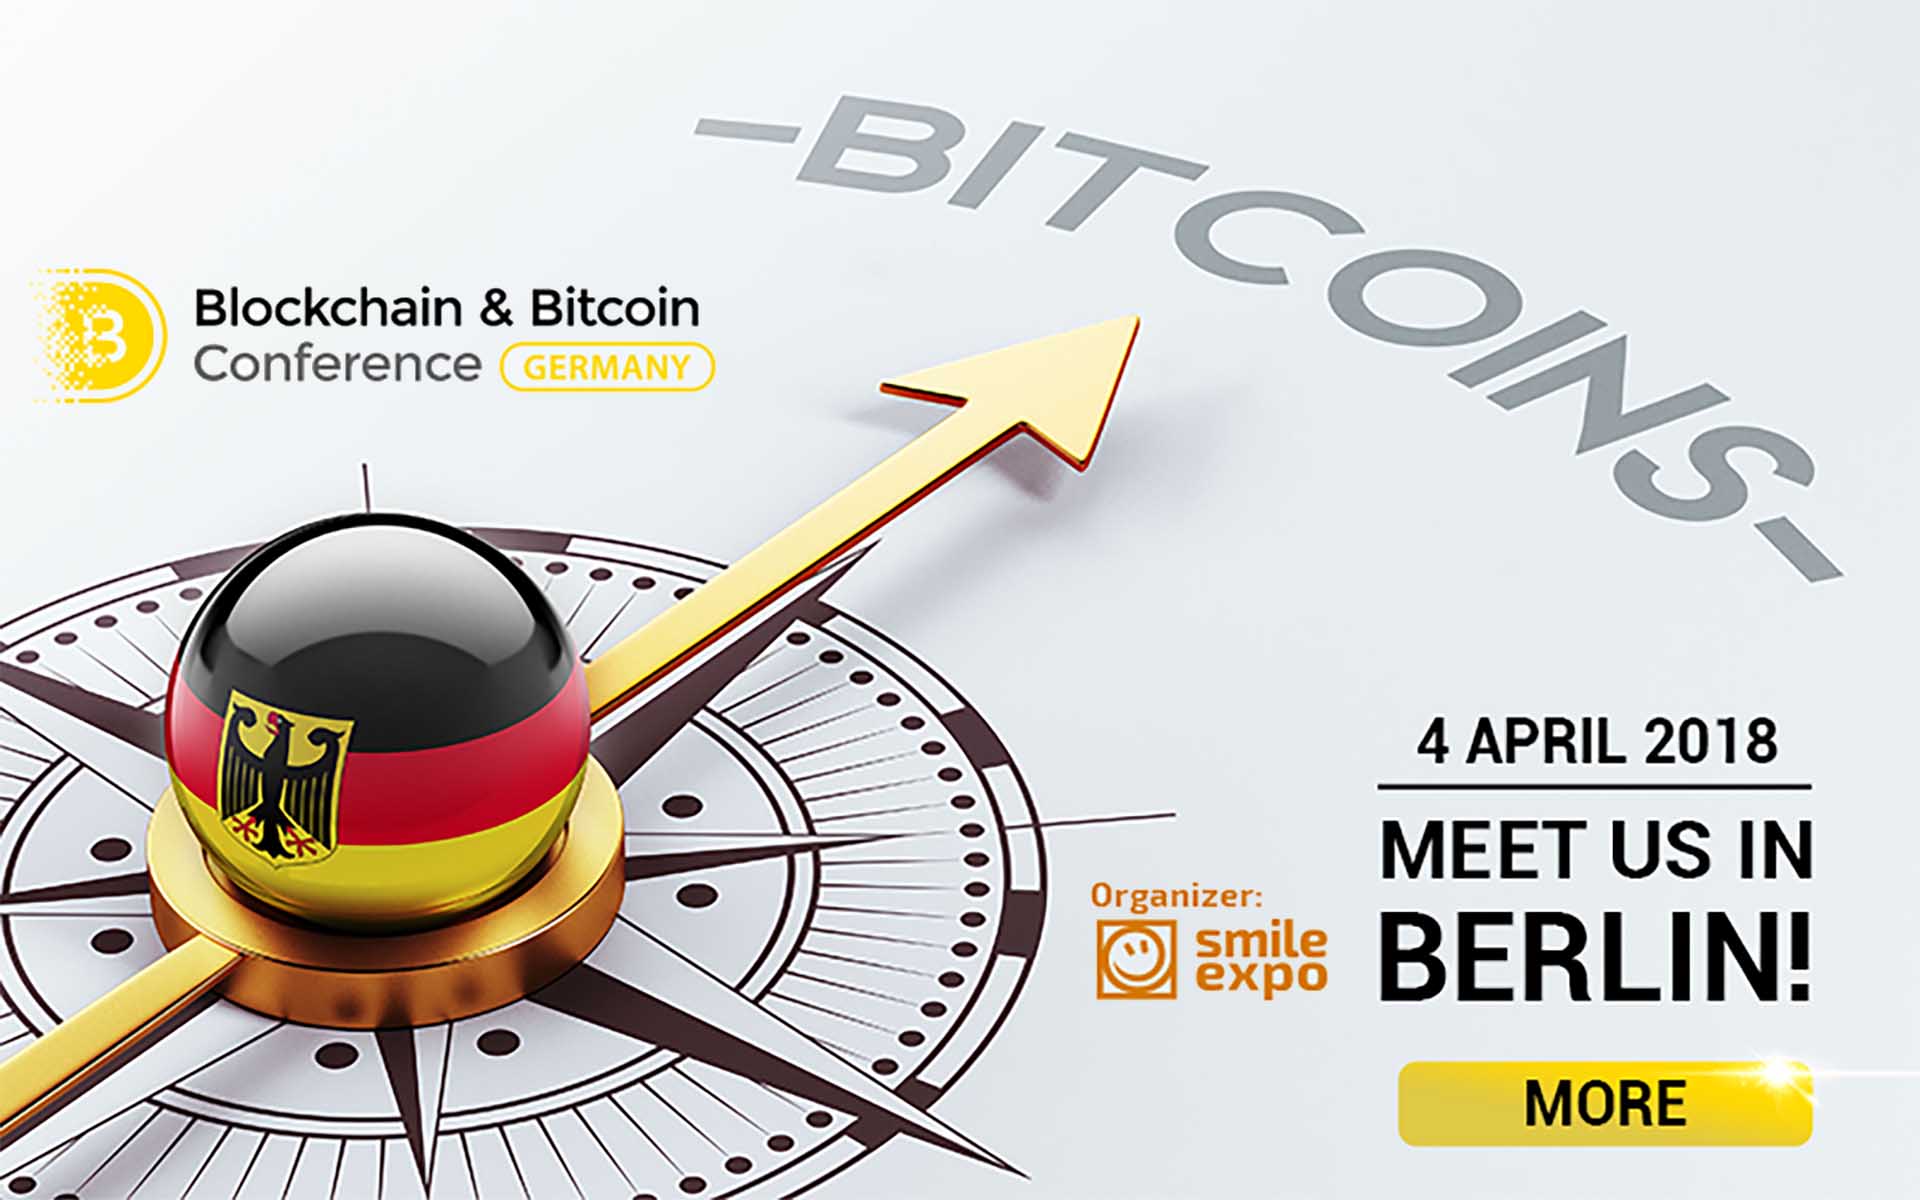 Blockchain Implementation, ICO for Start-ups, Analytics of Cryptocurrencies: This and More at Blockchain & Bitcoin Conference Germany